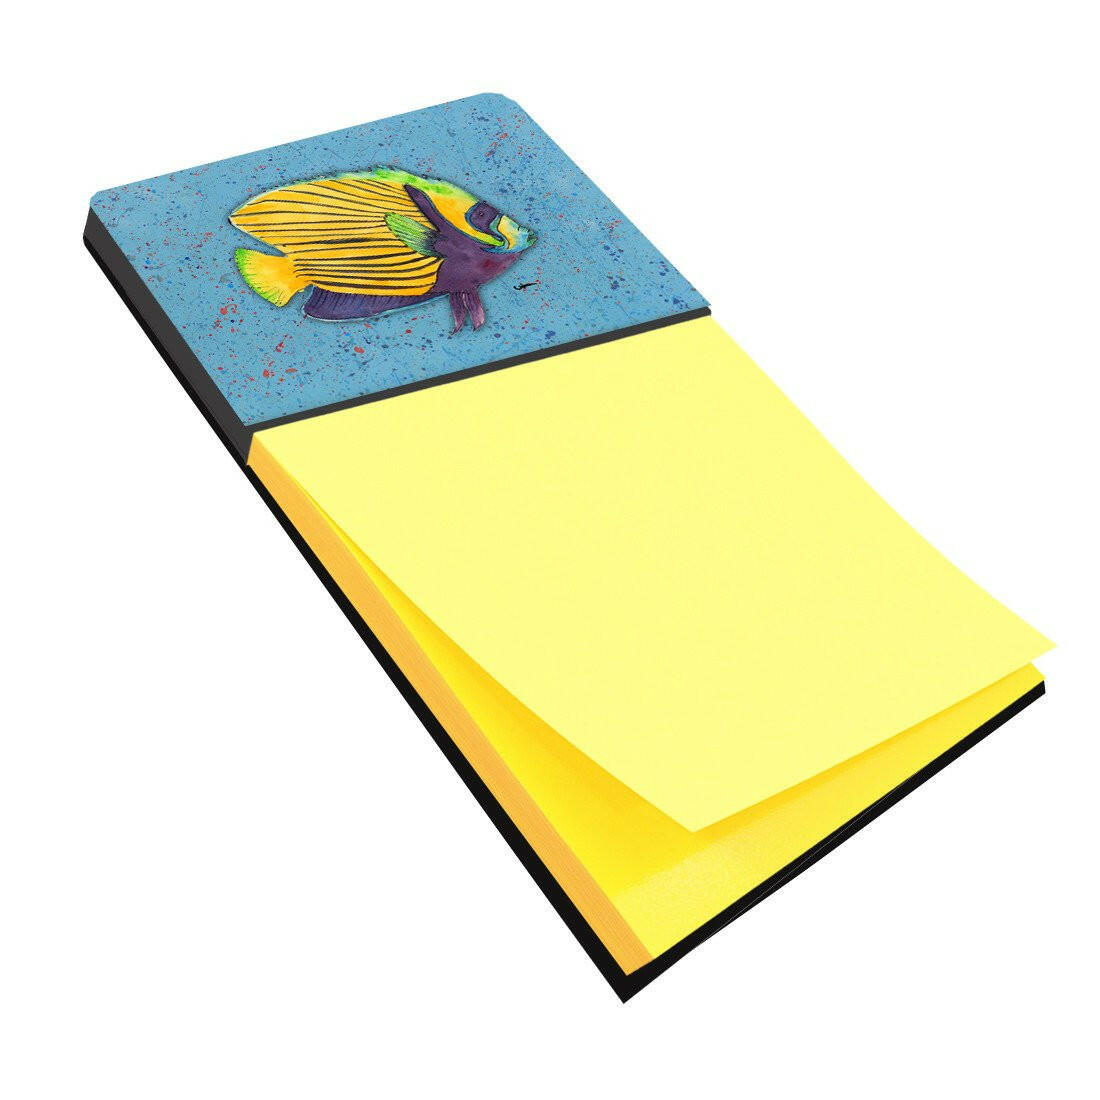 Tropical Fish on Blue Refiillable Sticky Note Holder or Postit Note Dispenser 8579SN by Caroline's Treasures